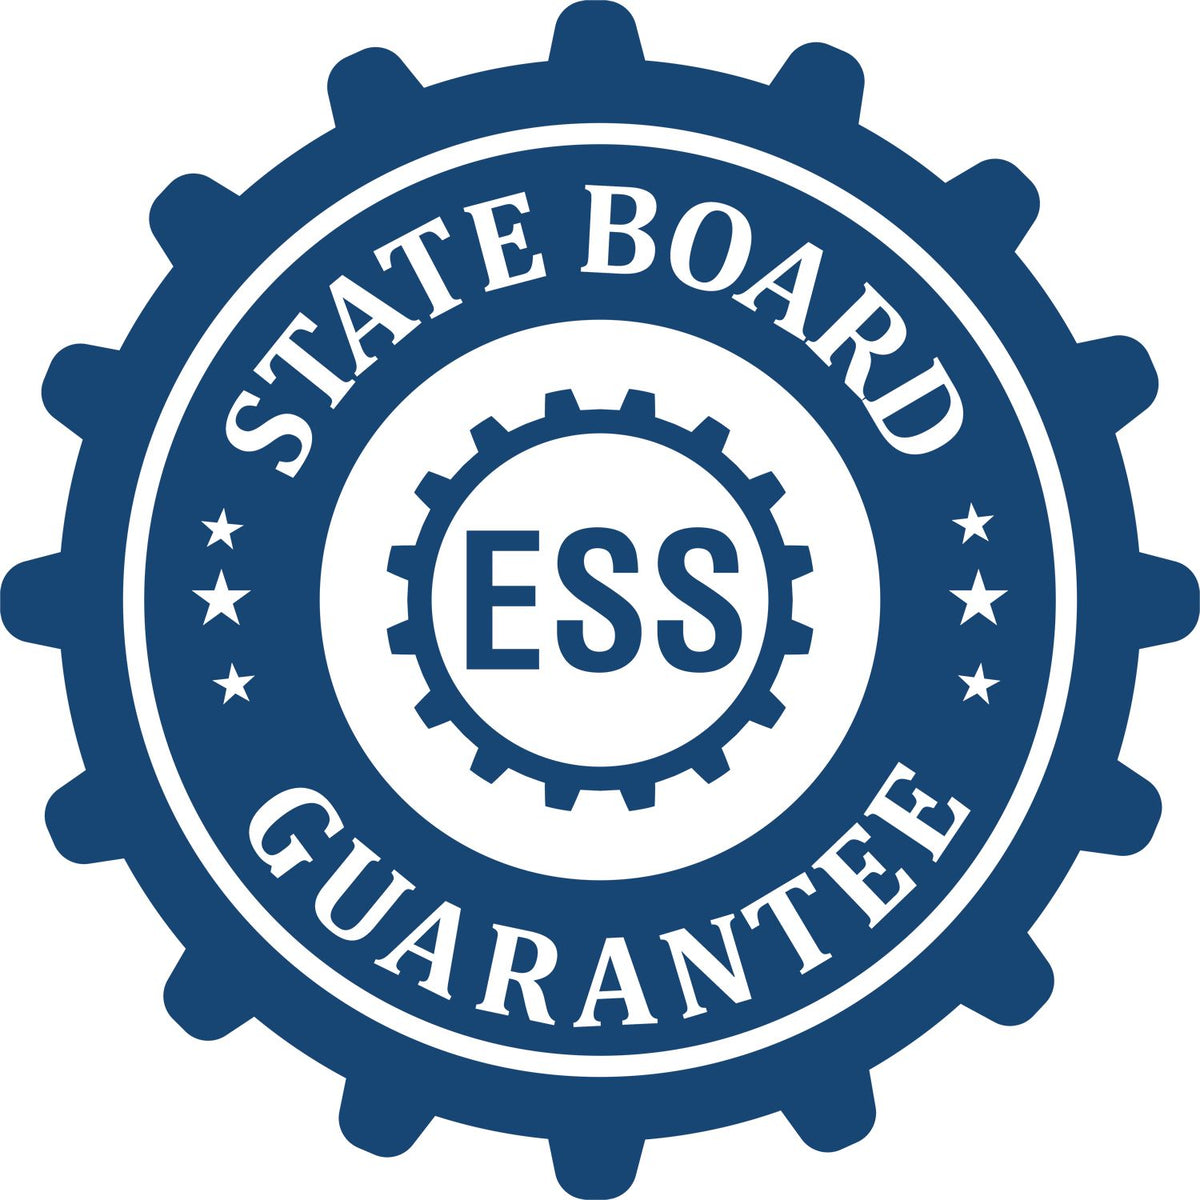 An emblem in a gear shape illustrating a state board guarantee for the Gift Alaska Landscape Architect Seal